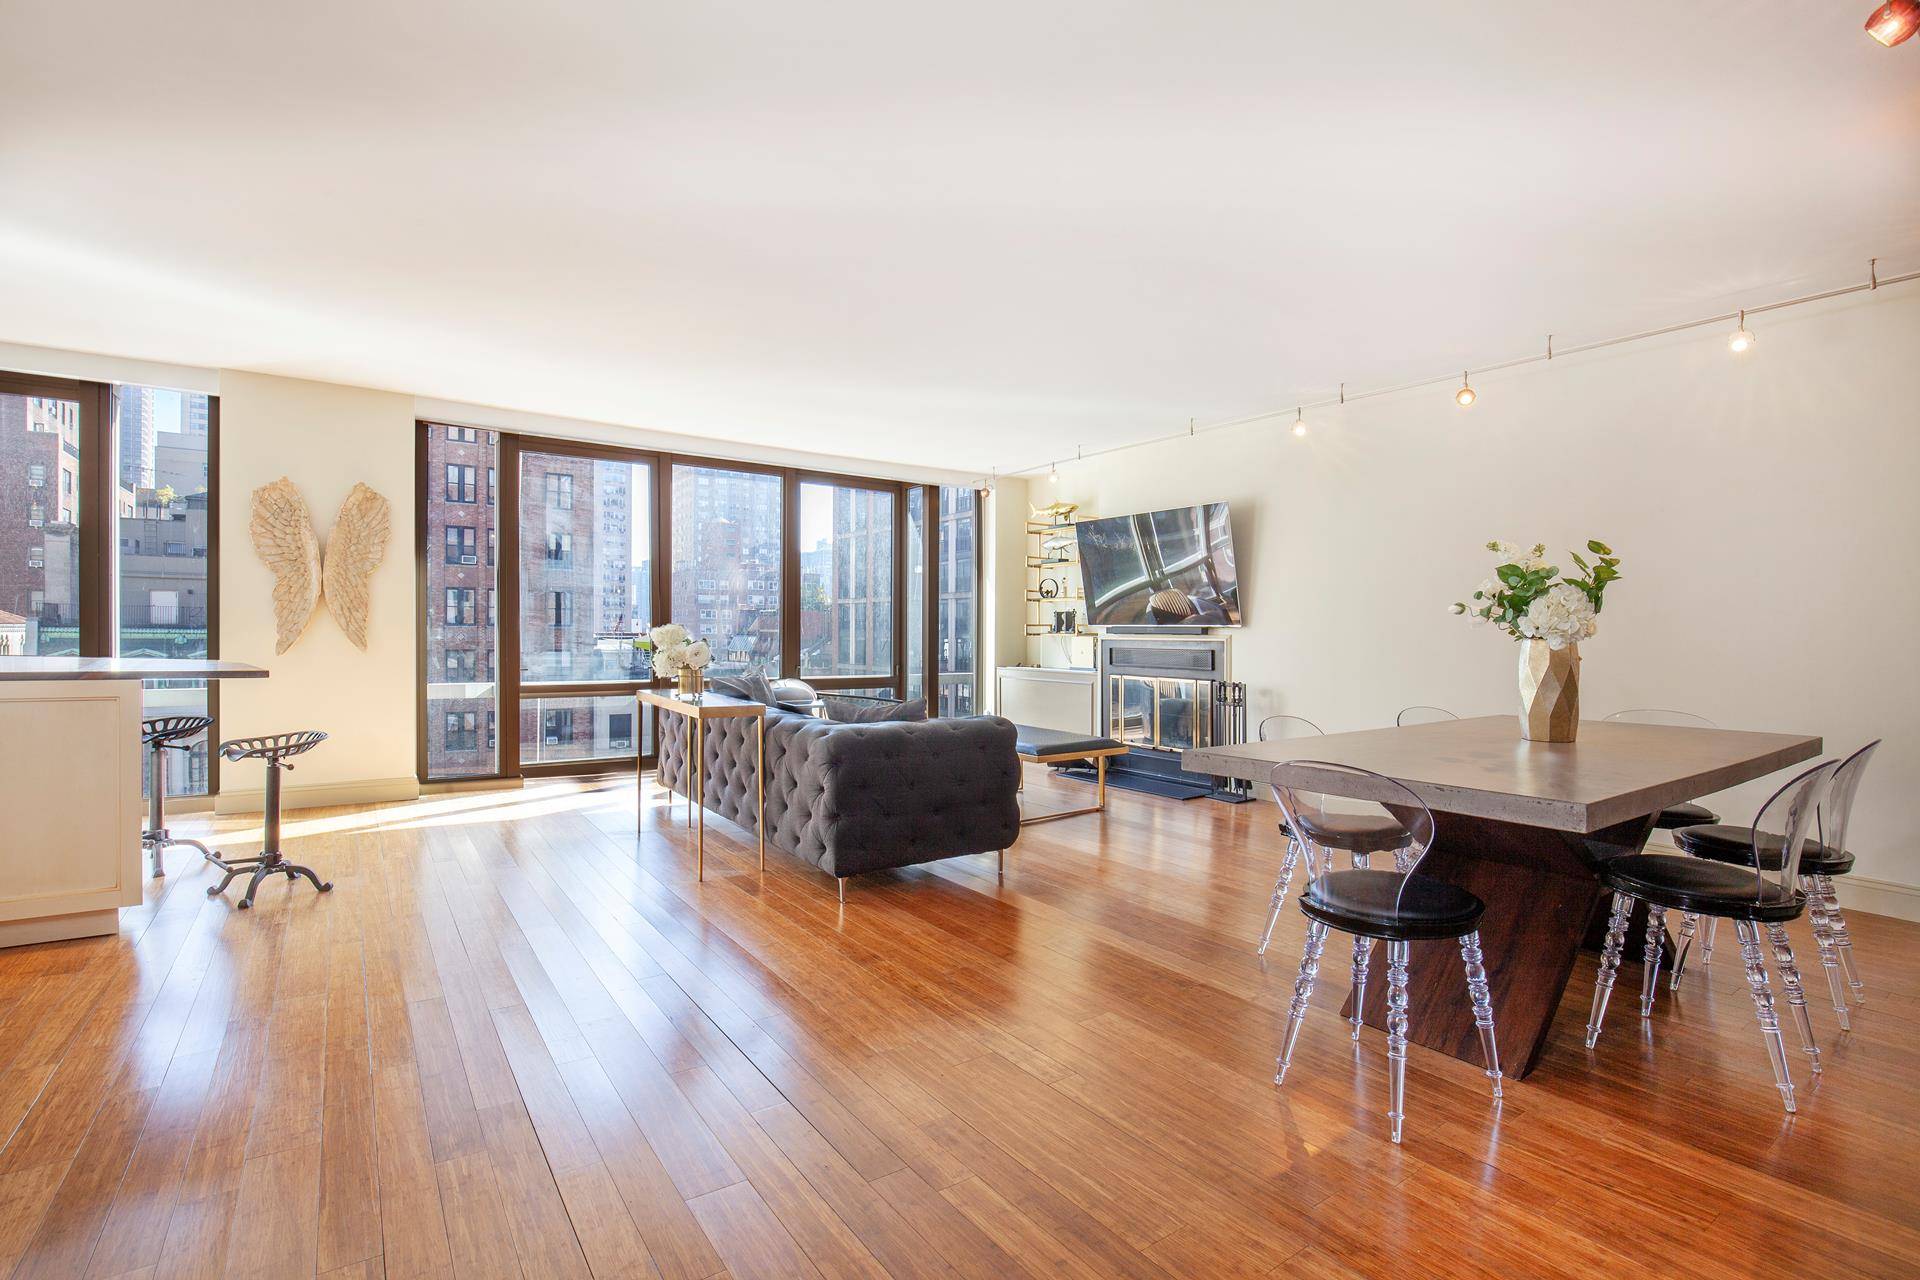 Completely Gut Renovated 2 Bed, 2 Bath, this Full Floor CONDO is in absolute MINT condition and perfect for anyone looking for a modern flair on Park Ave.